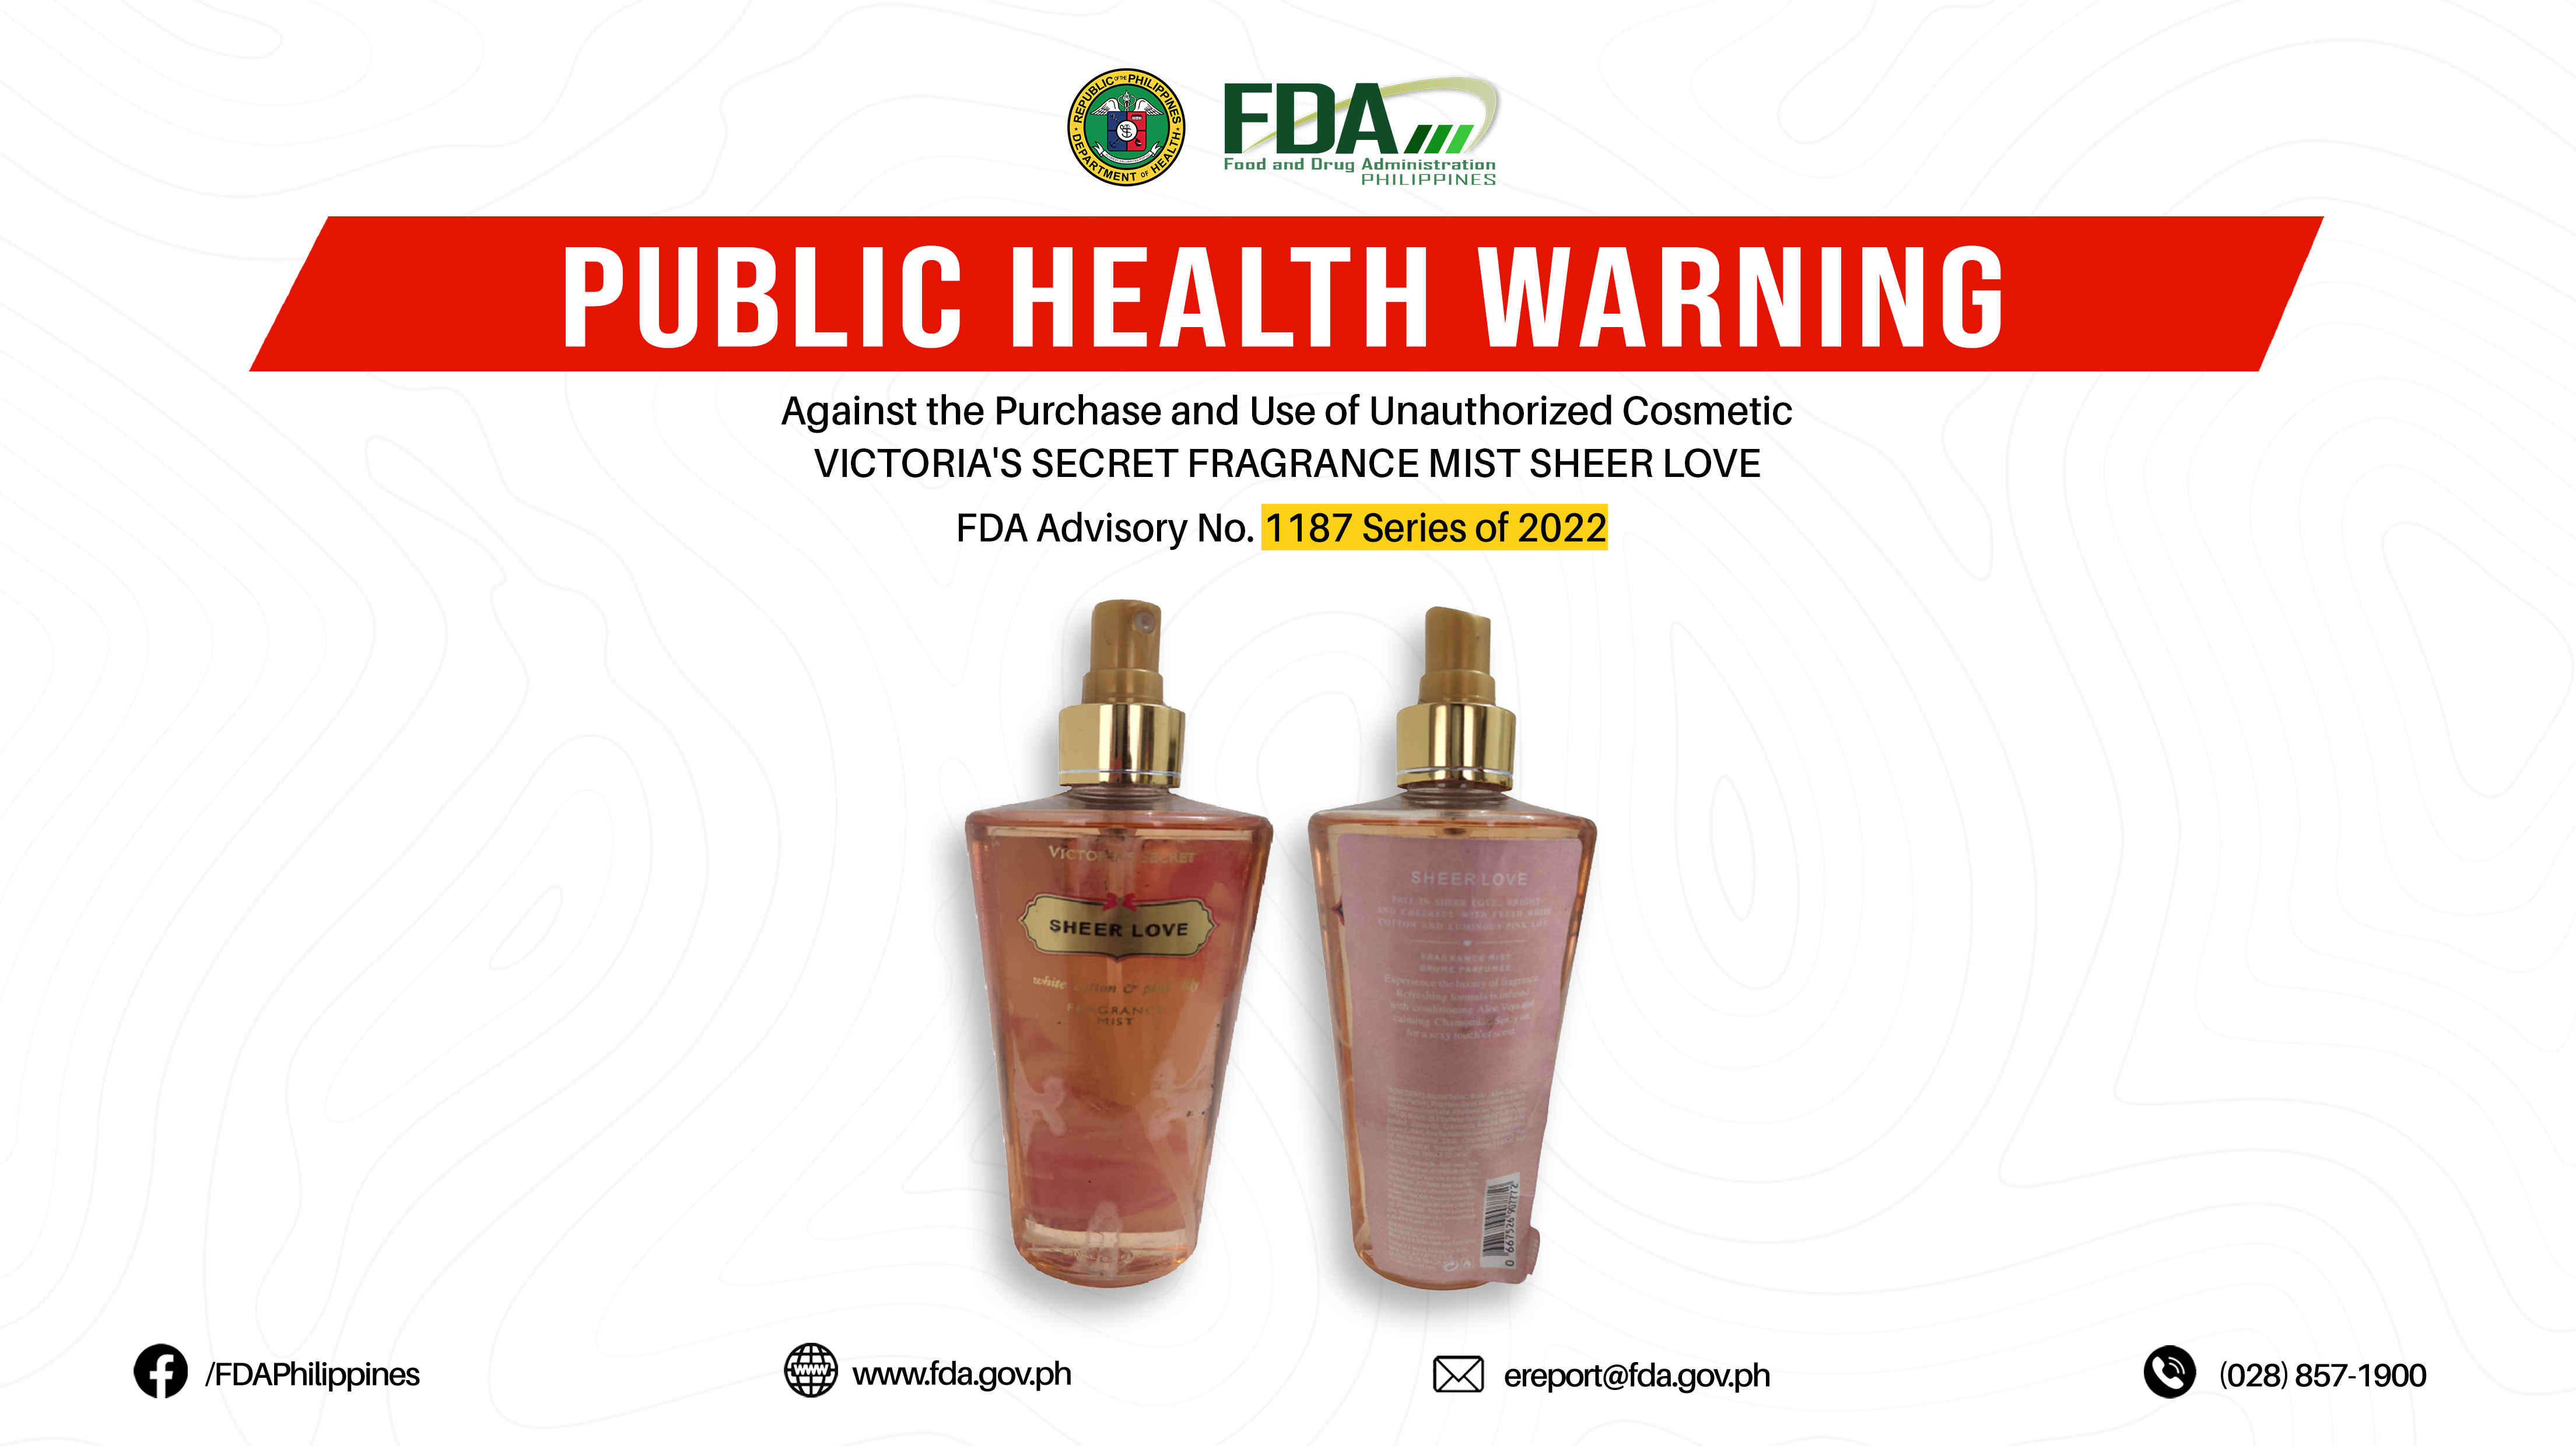 FDA Advisory No.2022-1187 || Public Health Warning Against the Purchase and Use of Unauthorized Cosmetic VICTORIA’S SECRET FRAGRANCE MIST SHEER LOVE